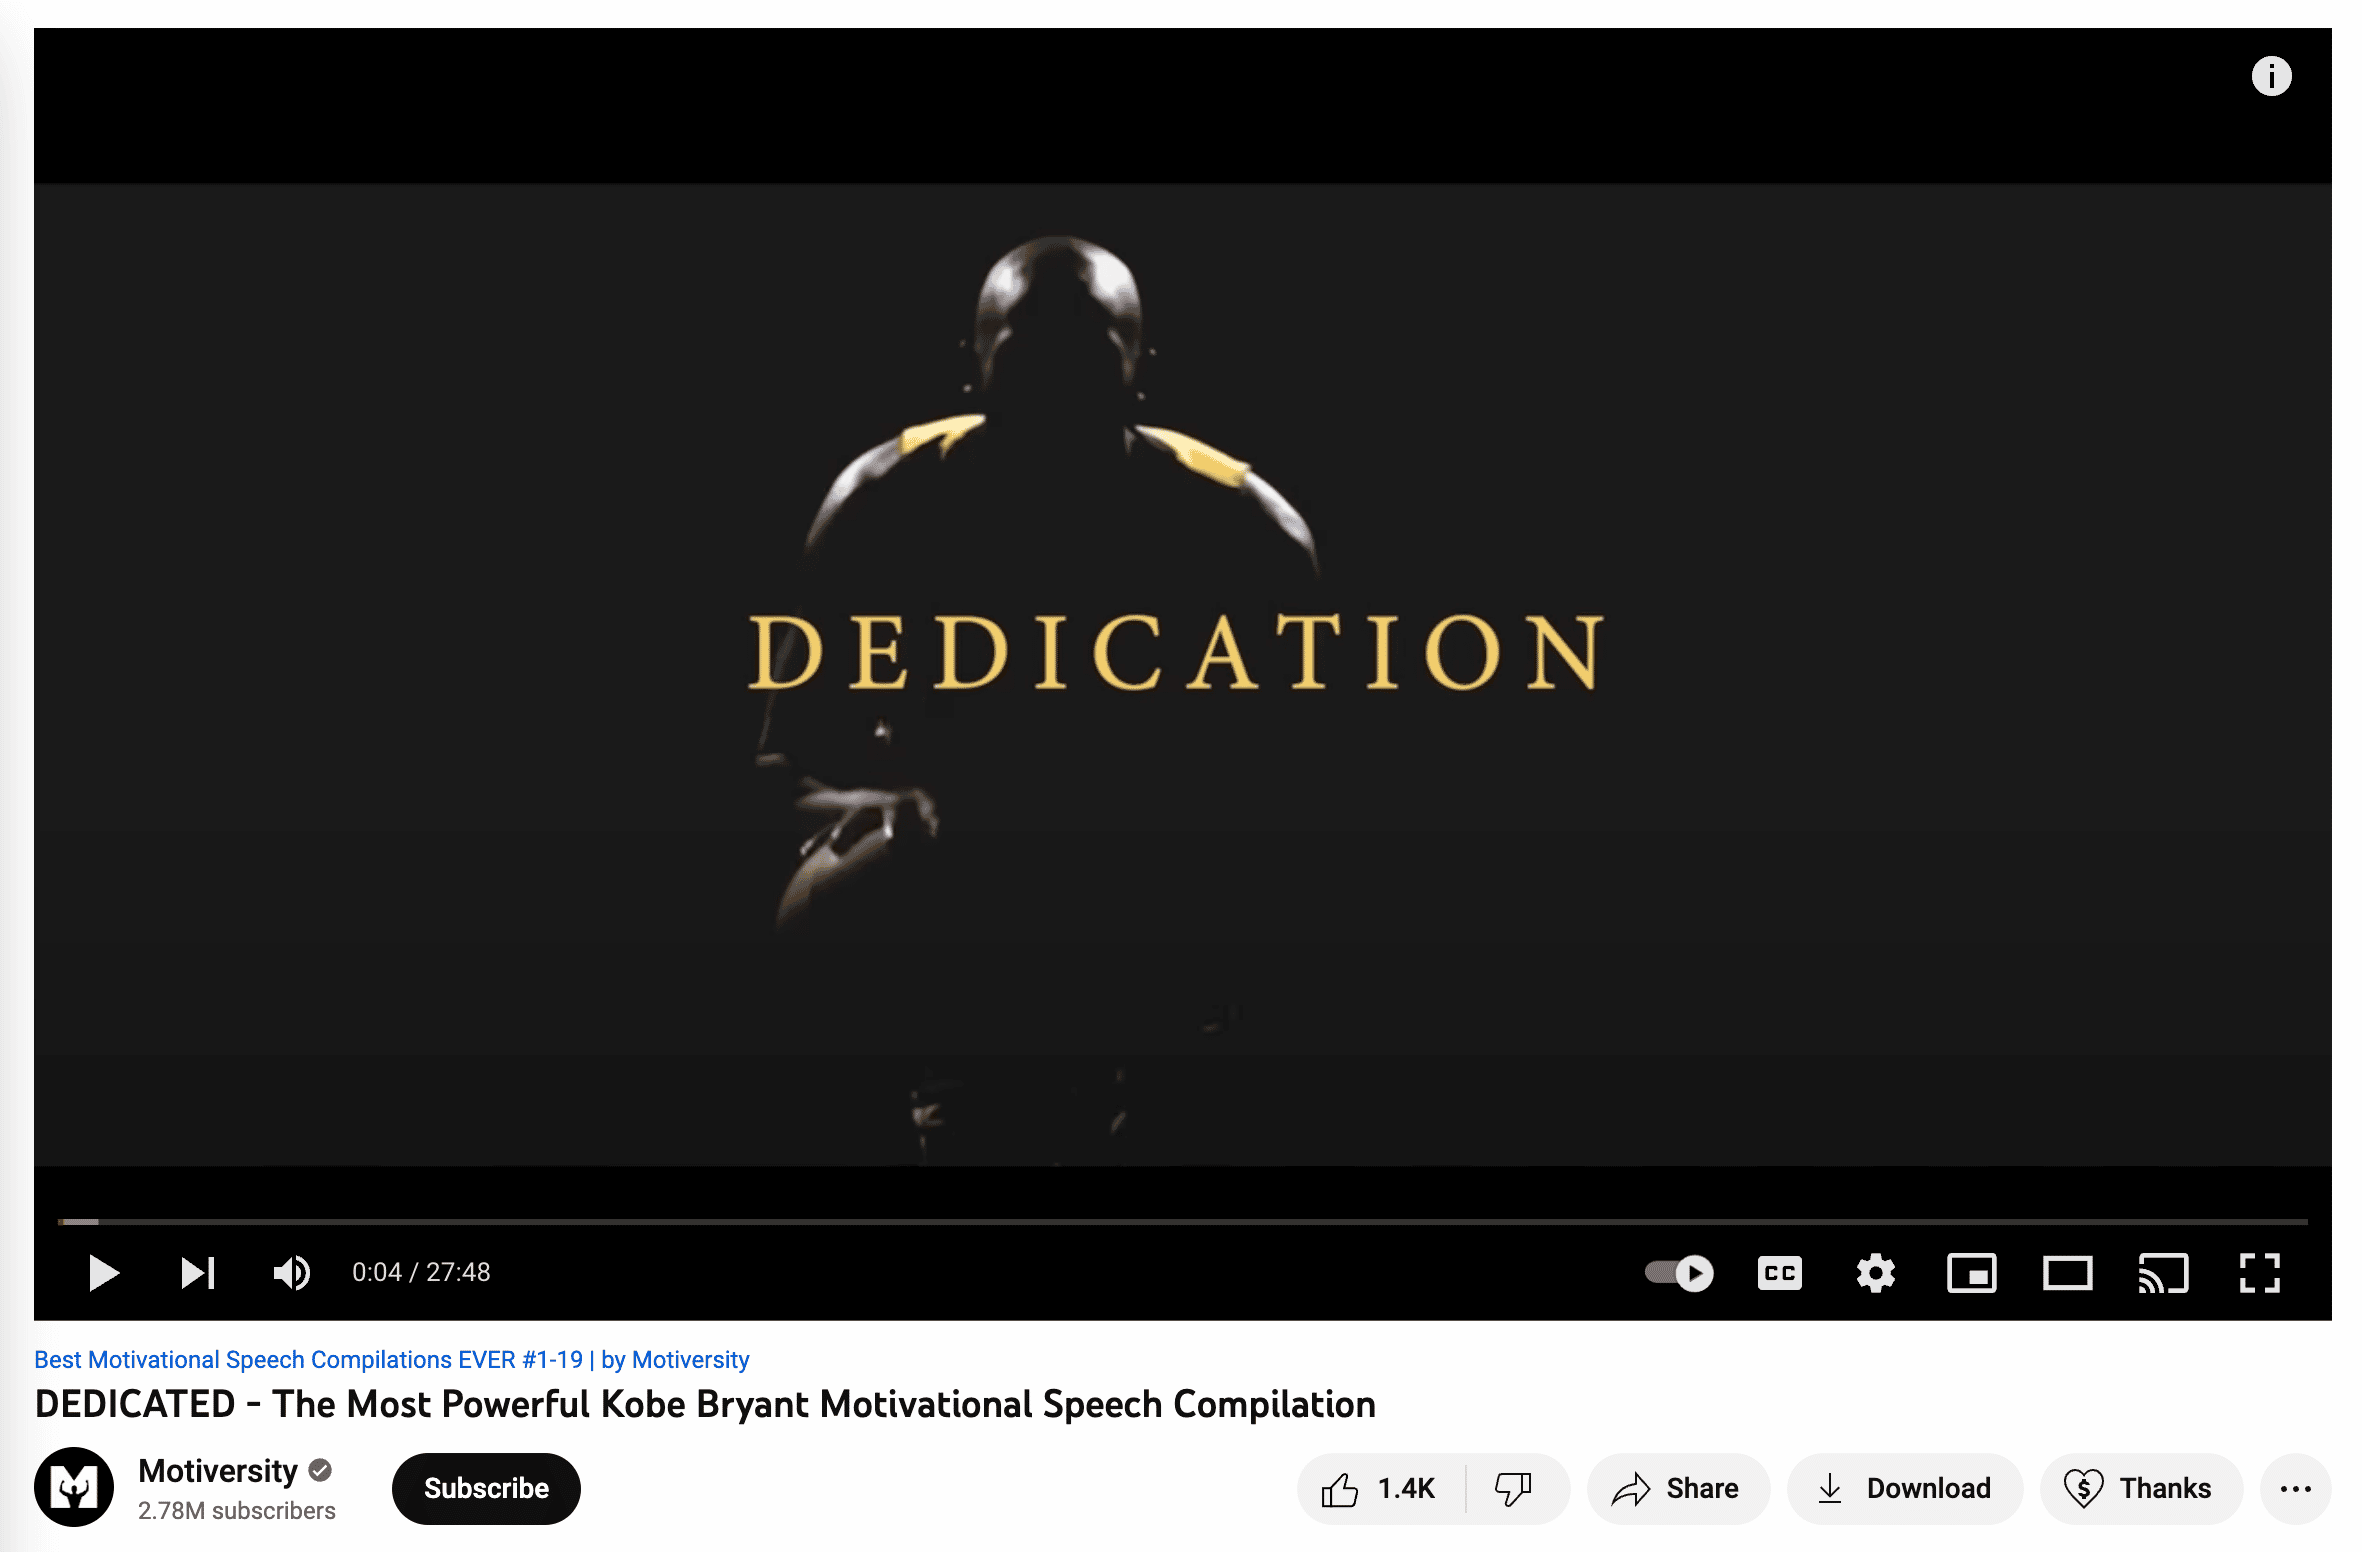 motivational video showing kobe bryant dribbling ball with the words dedication overlaid